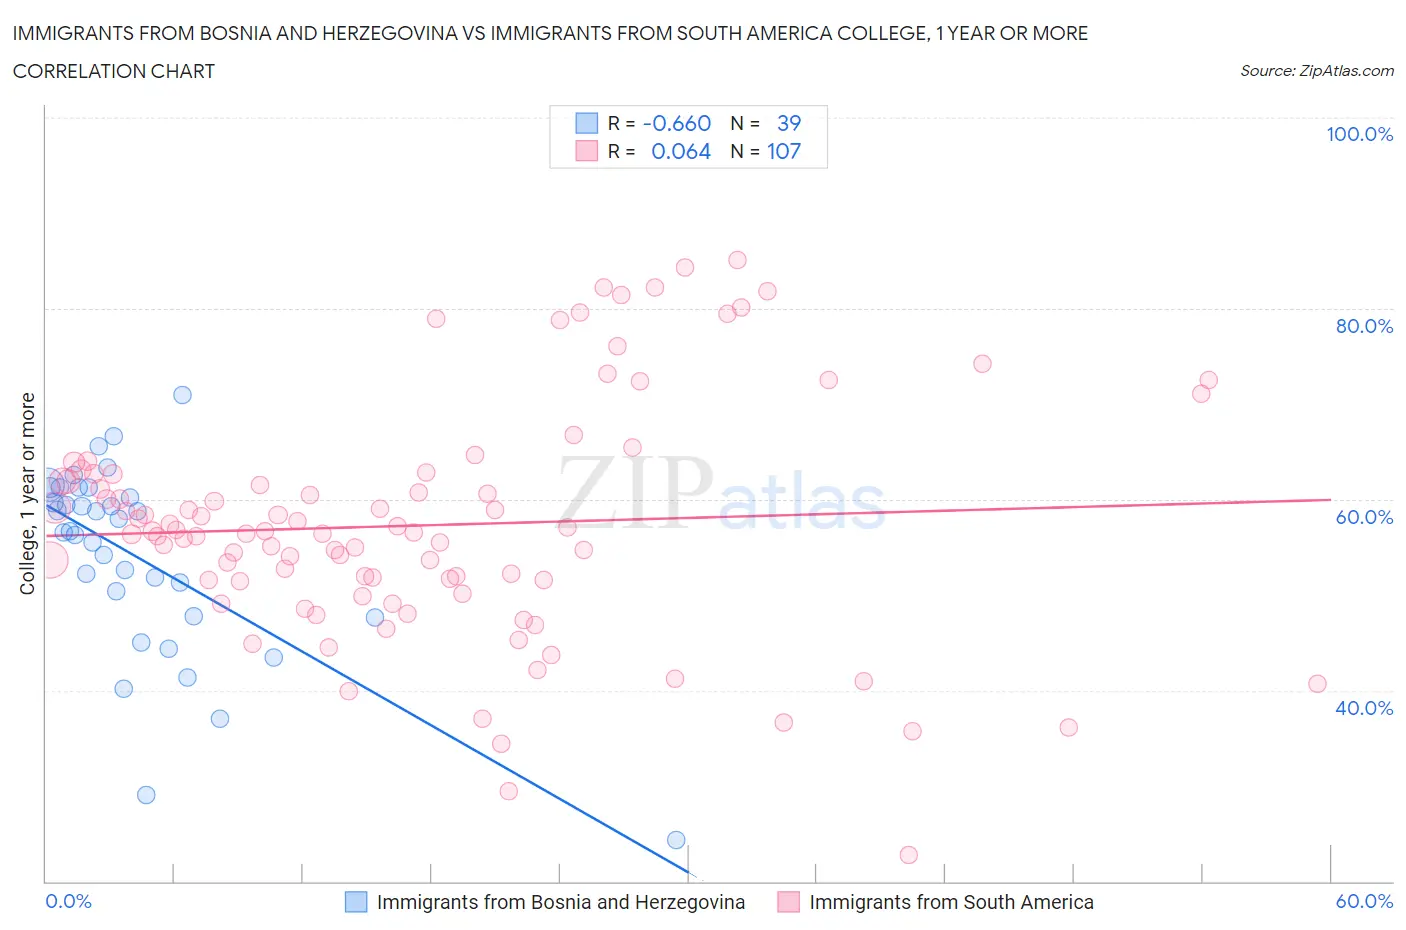 Immigrants from Bosnia and Herzegovina vs Immigrants from South America College, 1 year or more